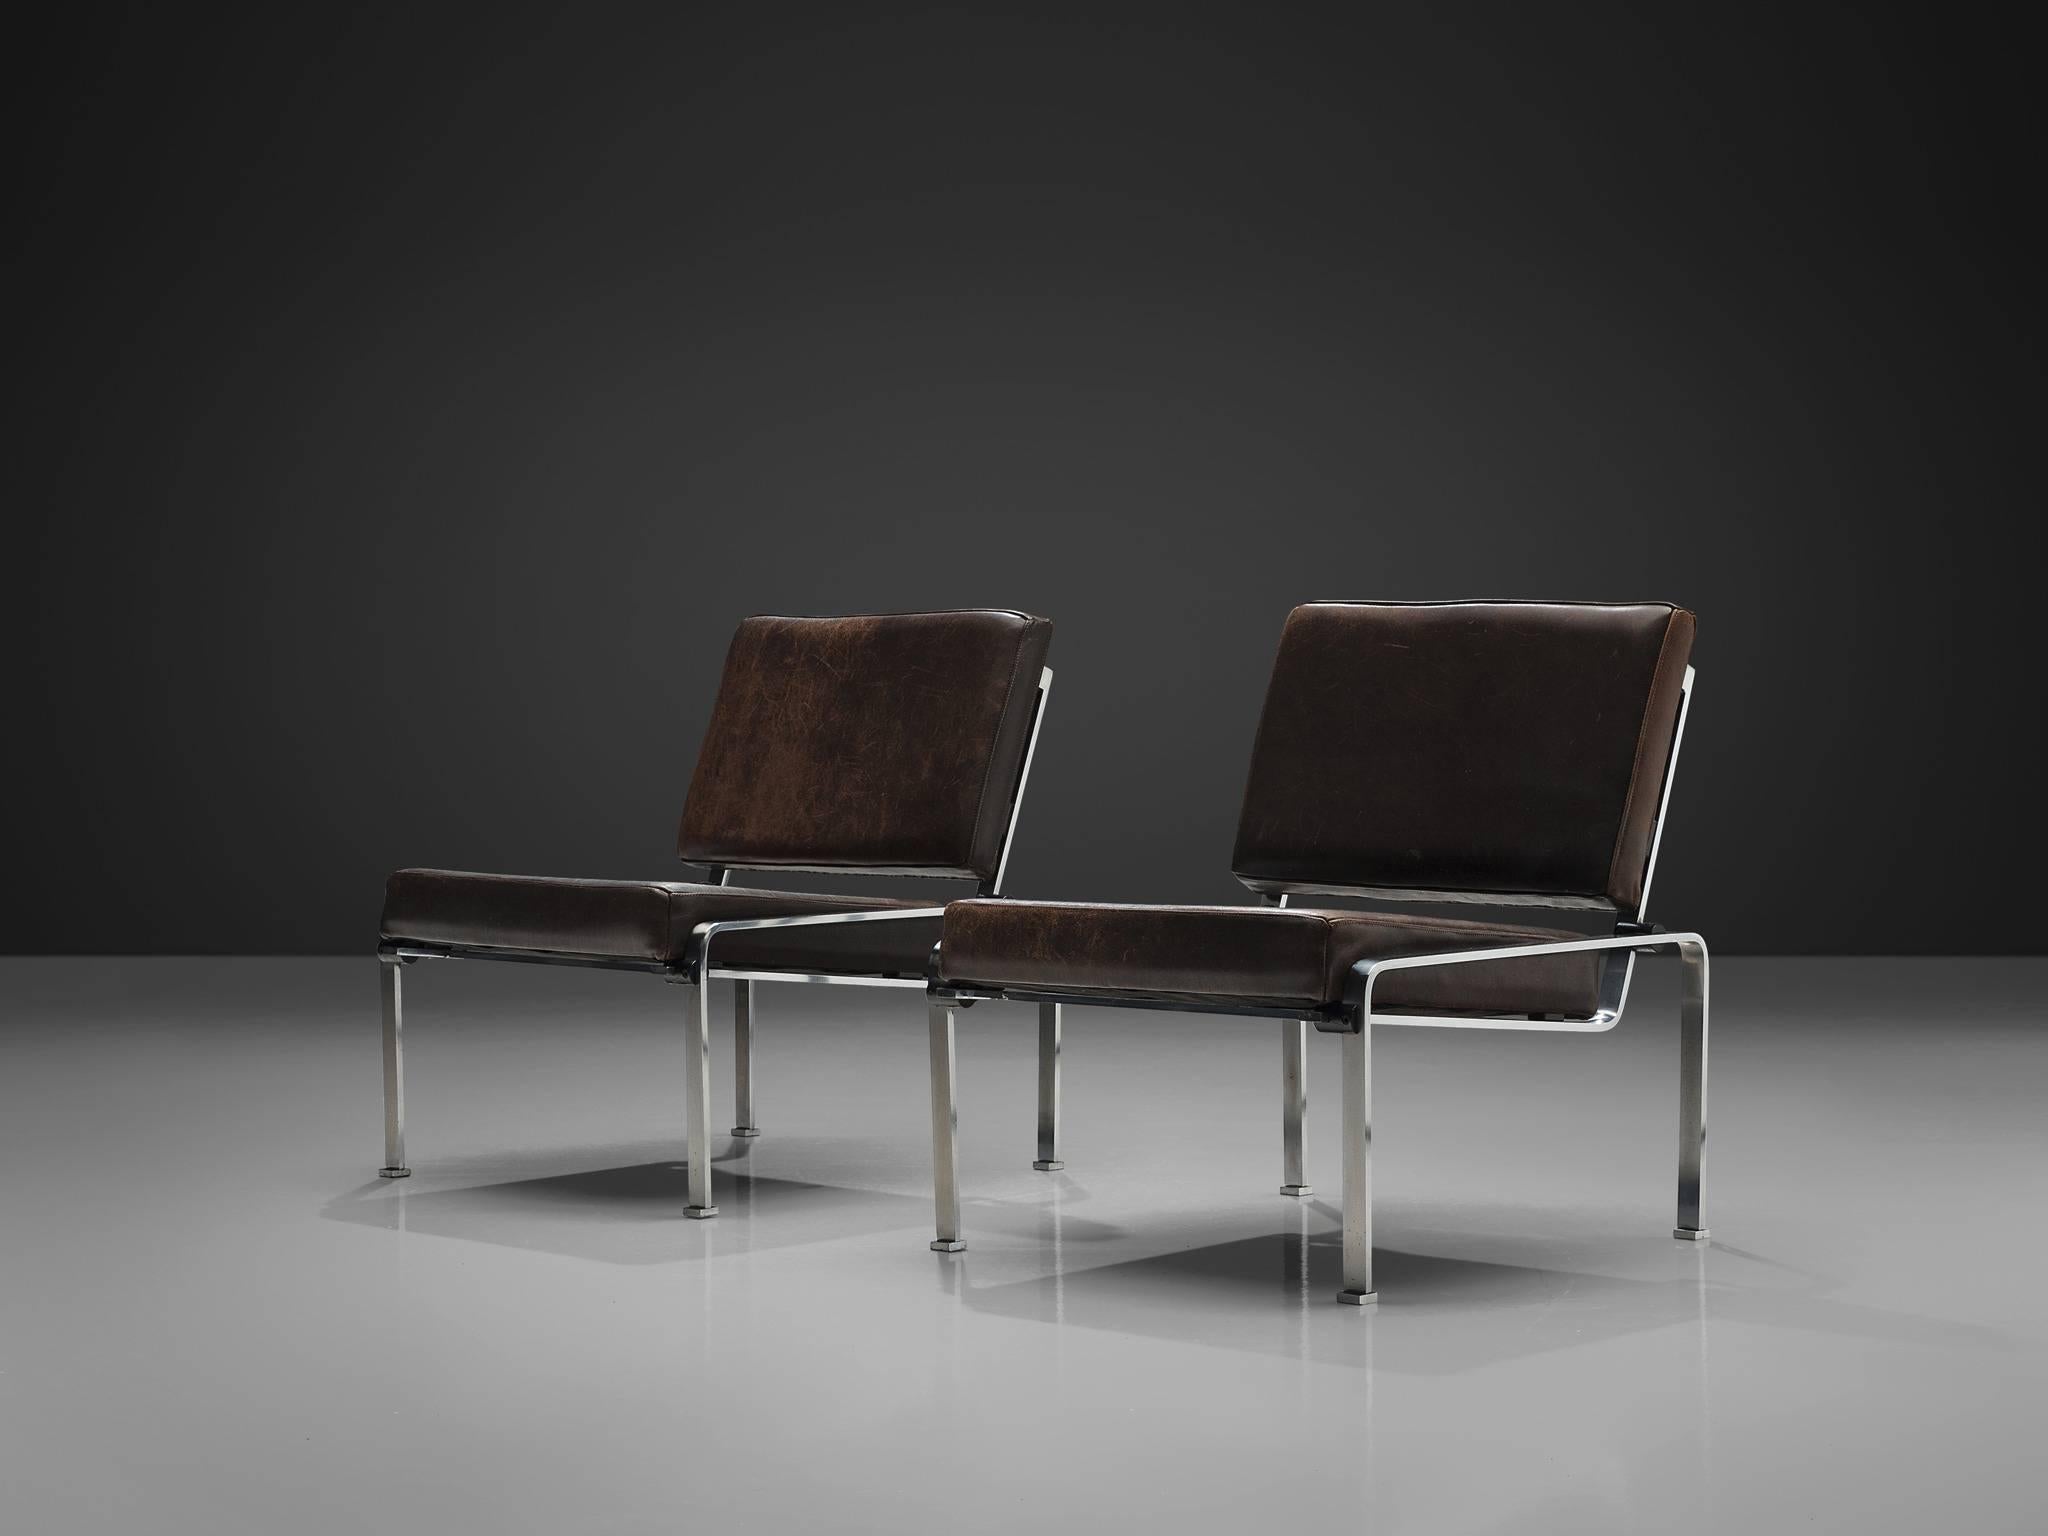 Pair of lounge chairs, in steel and black brown leather

Modern chairs in steel and patinated black brown leather. The transparant frame holds an L-shaped seating. The base of these chairs gives it it's characteristic and open character. The